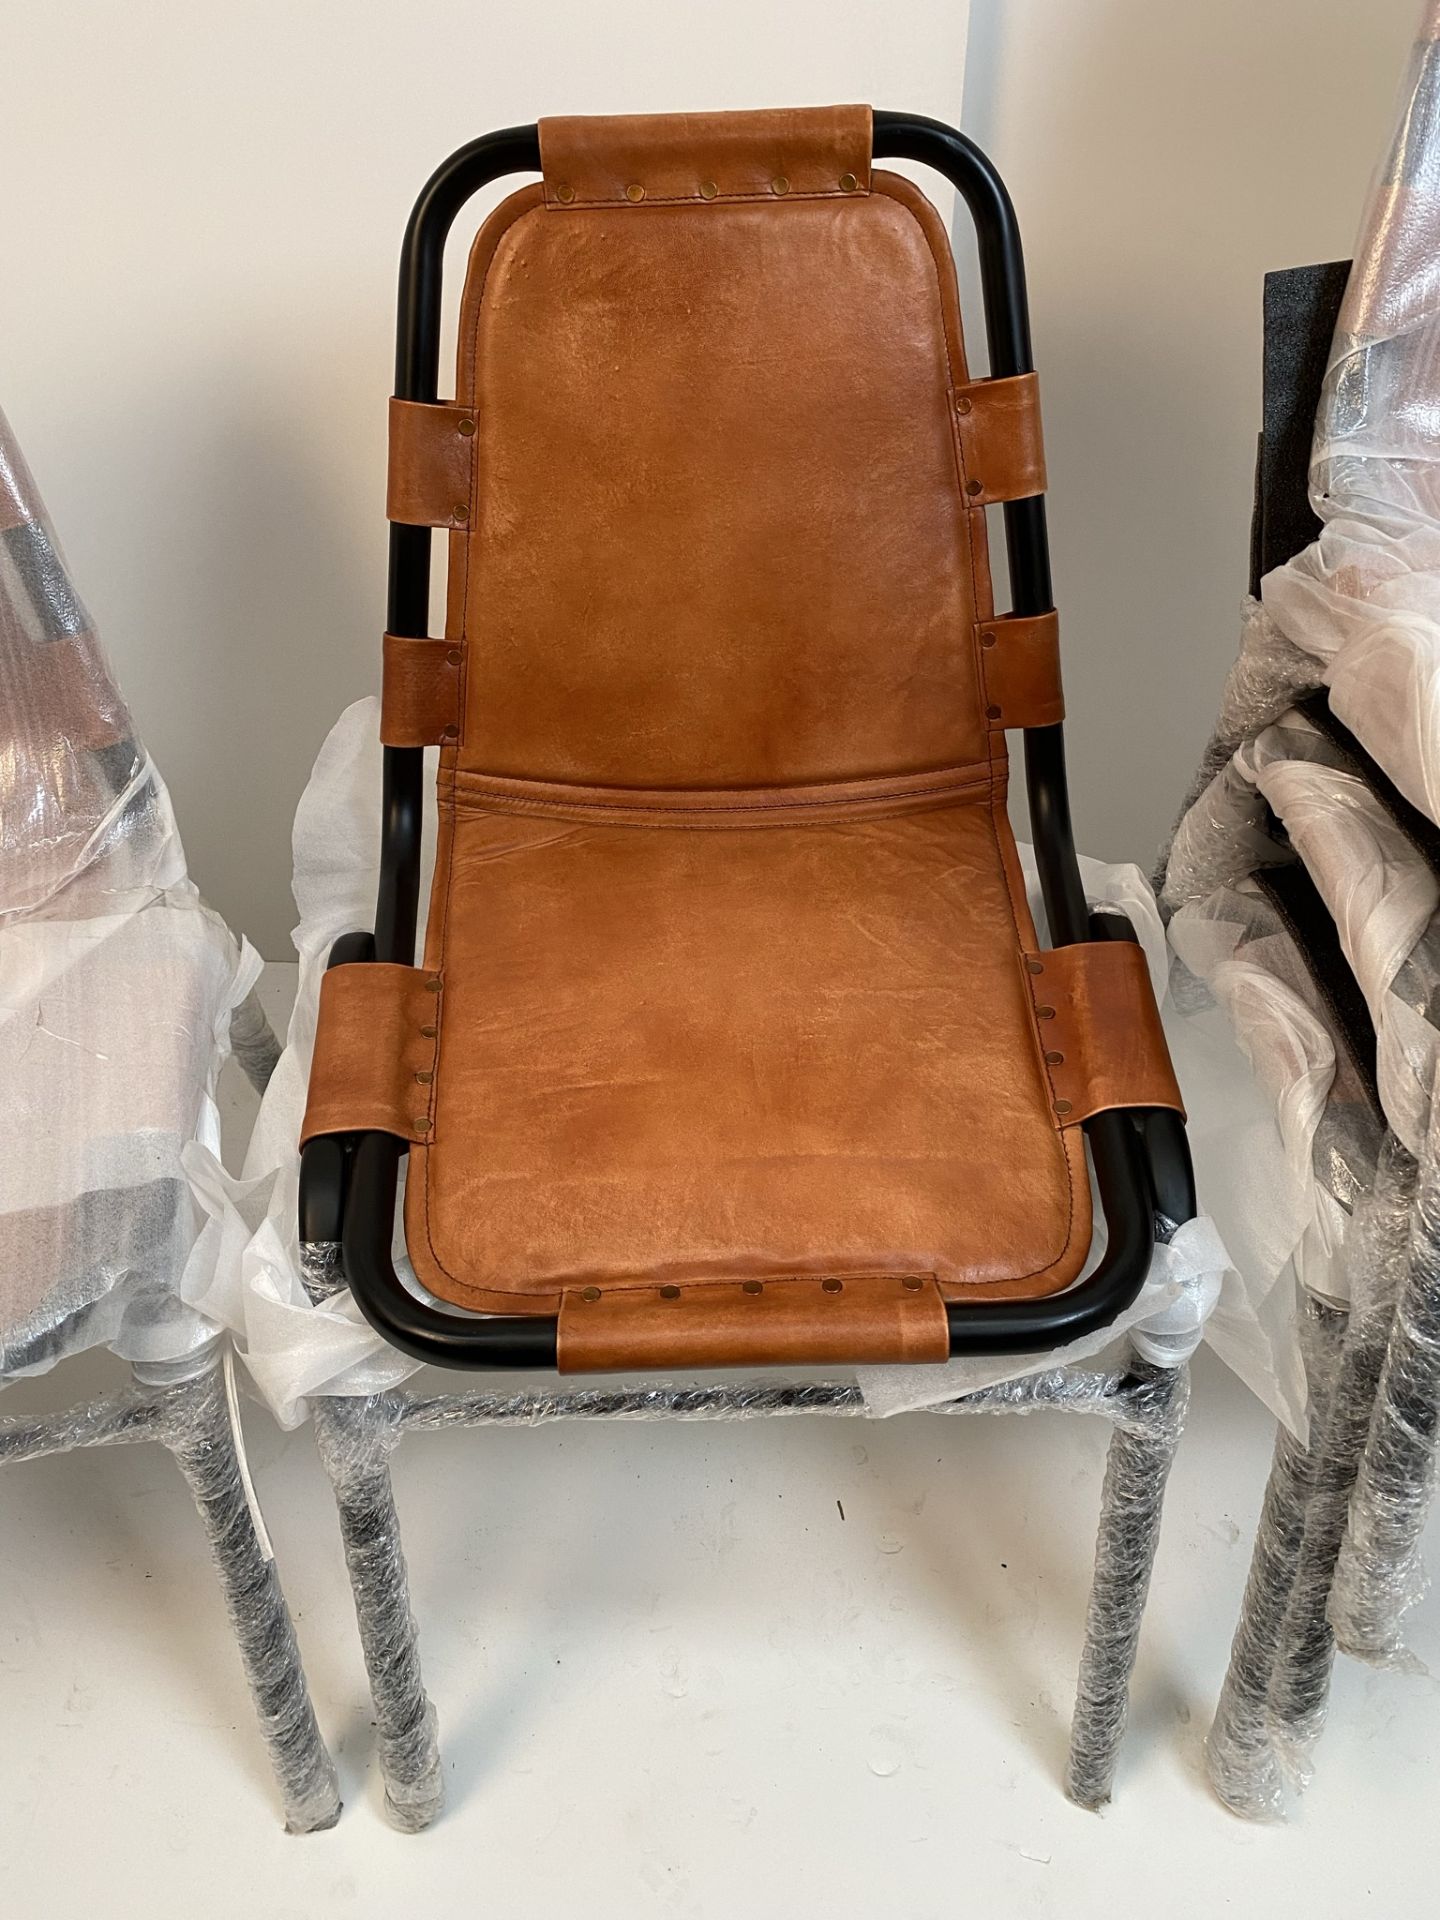 4 x Black Metal Framed Brown Leather Saddle Chairs - (boxed) plus one additional matching chair